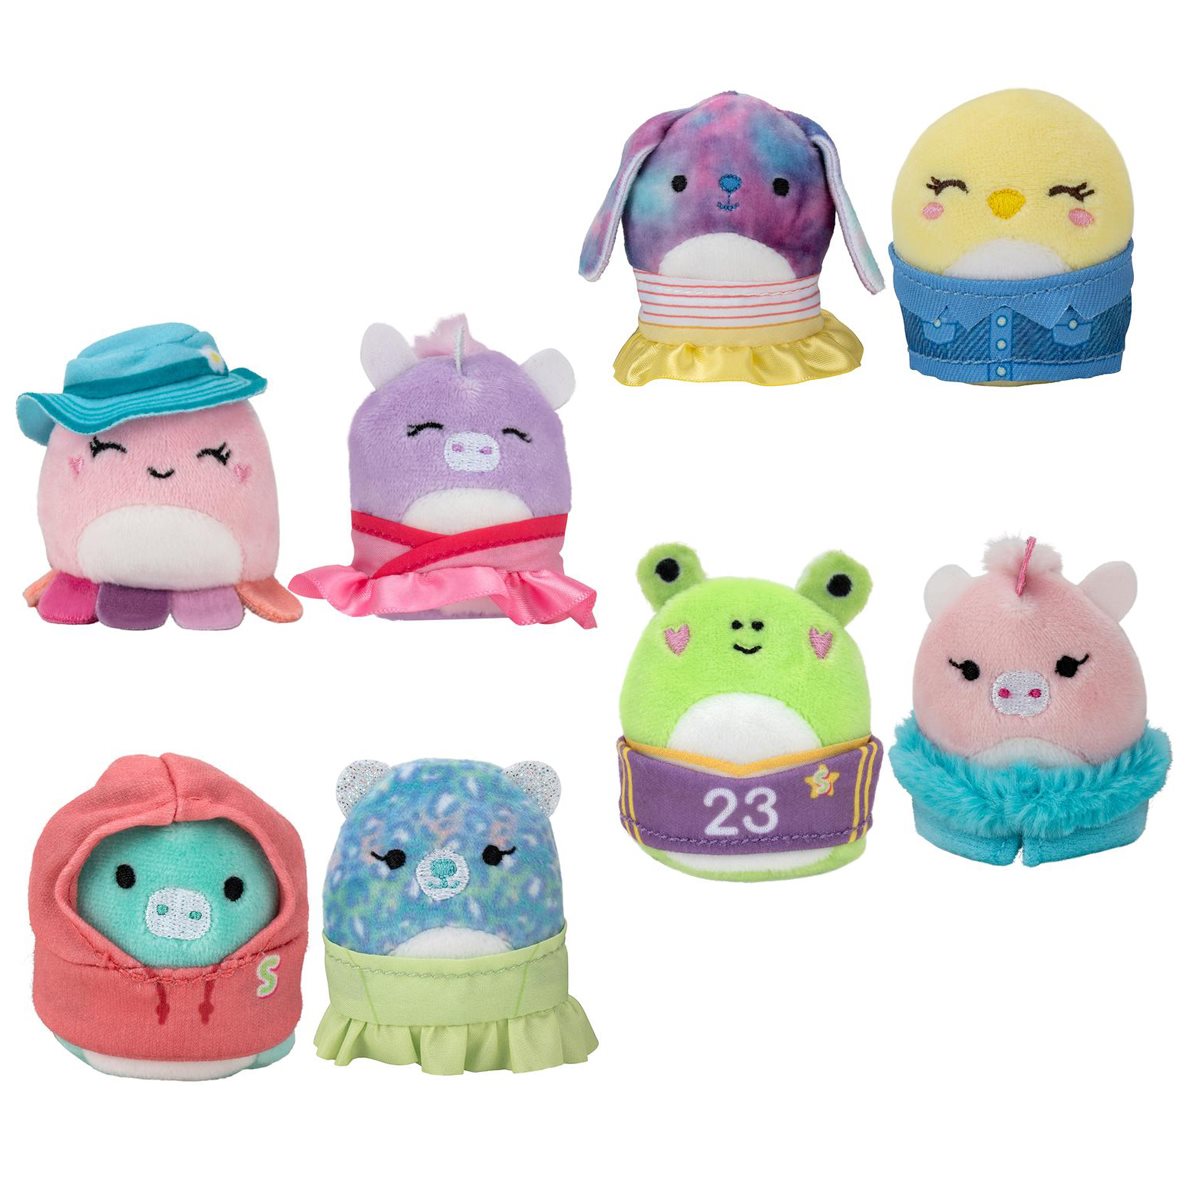 Jazwares - Squishville by Squishmallows Series 3 - BLIND PACK (1 Mini  Squishmallow & Accessory):  - Toys, Plush, Trading Cards,  Action Figures & Games online retail store shop sale